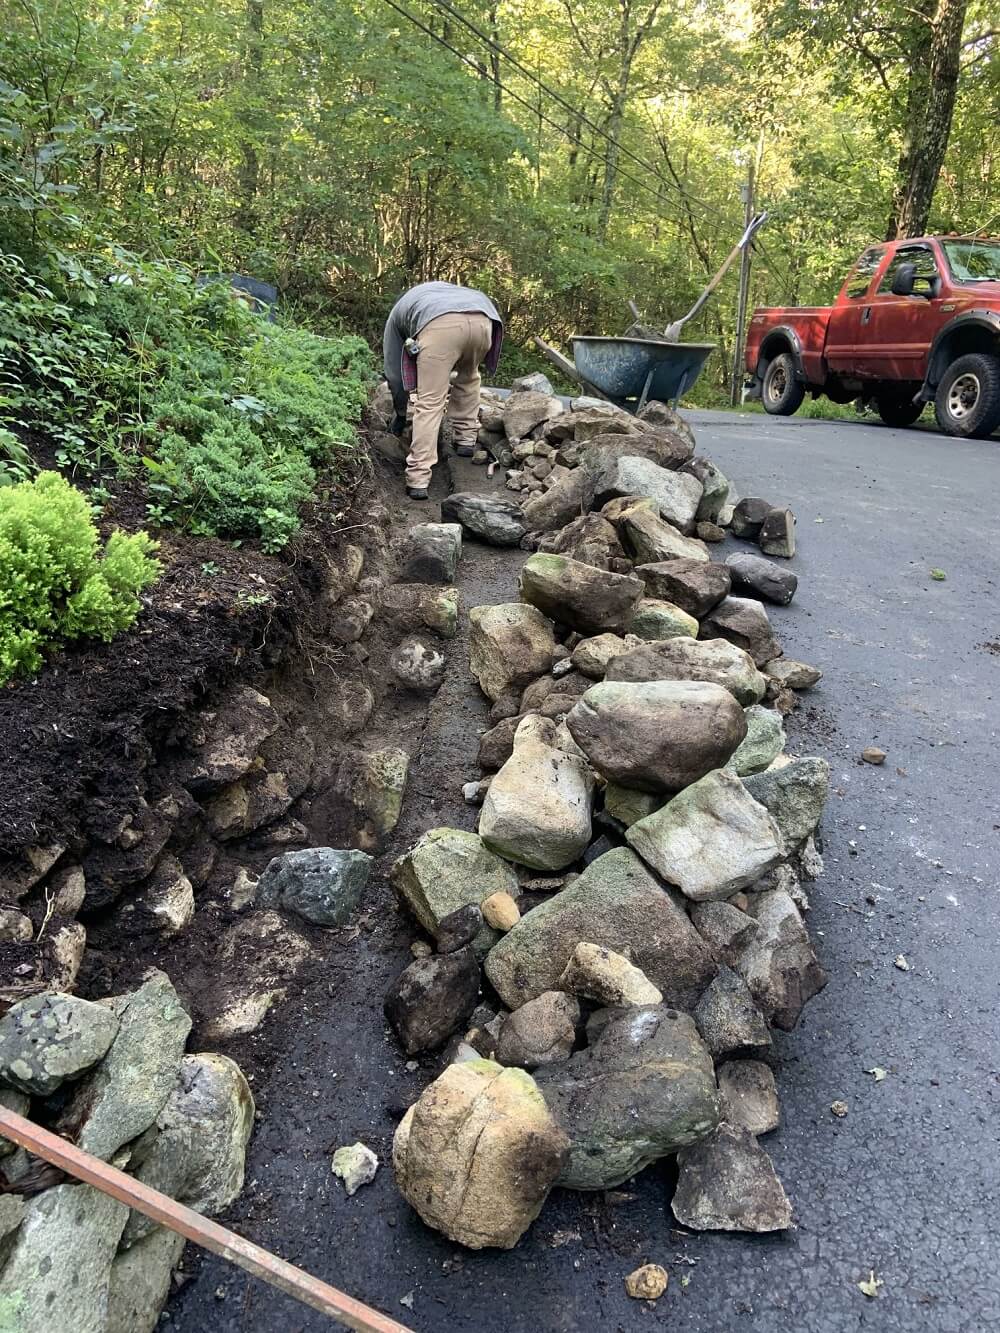 A man is building a rock wall in a scenic landscape.